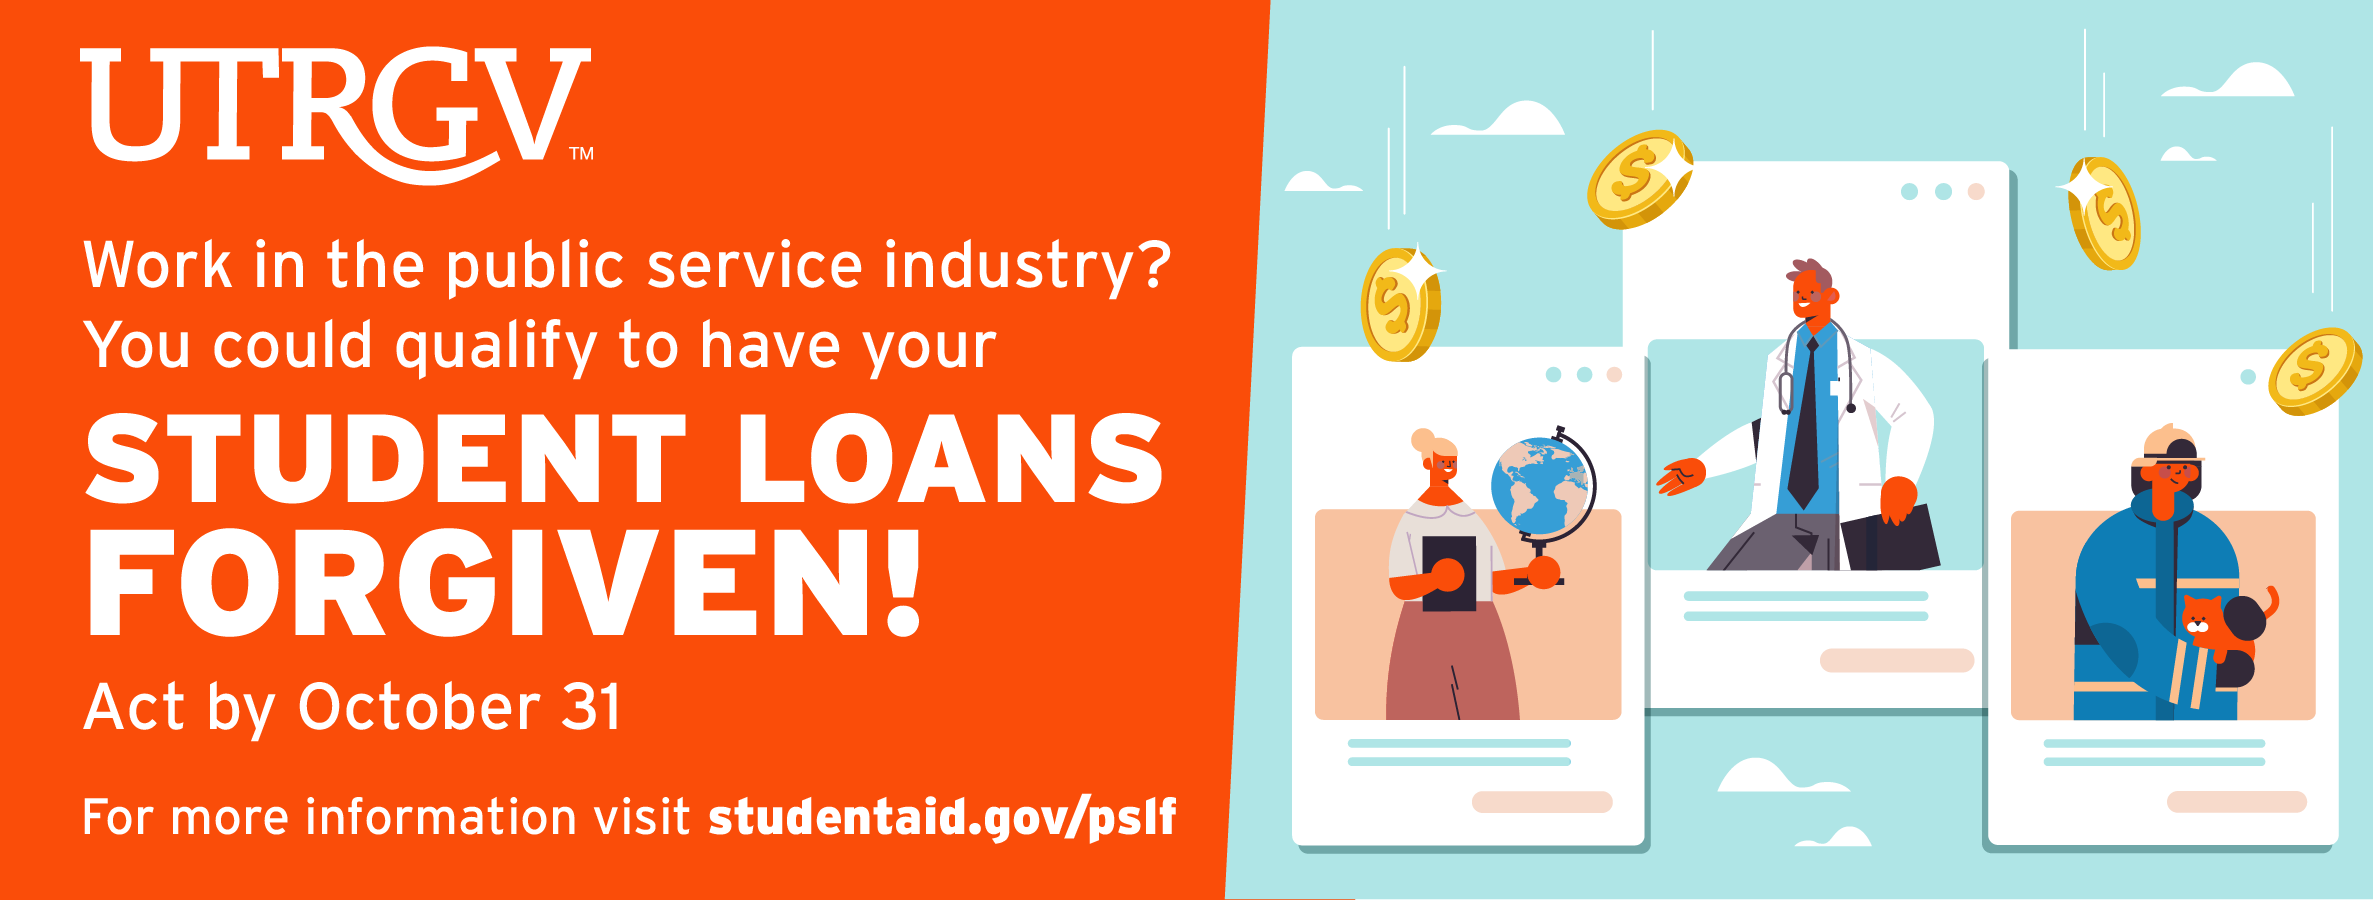 UTRGV | Work in the public service industry? You could qualify to have your student loans forgiven! Act by October 31, 2022. For more information visit studentaid.gov/pslf